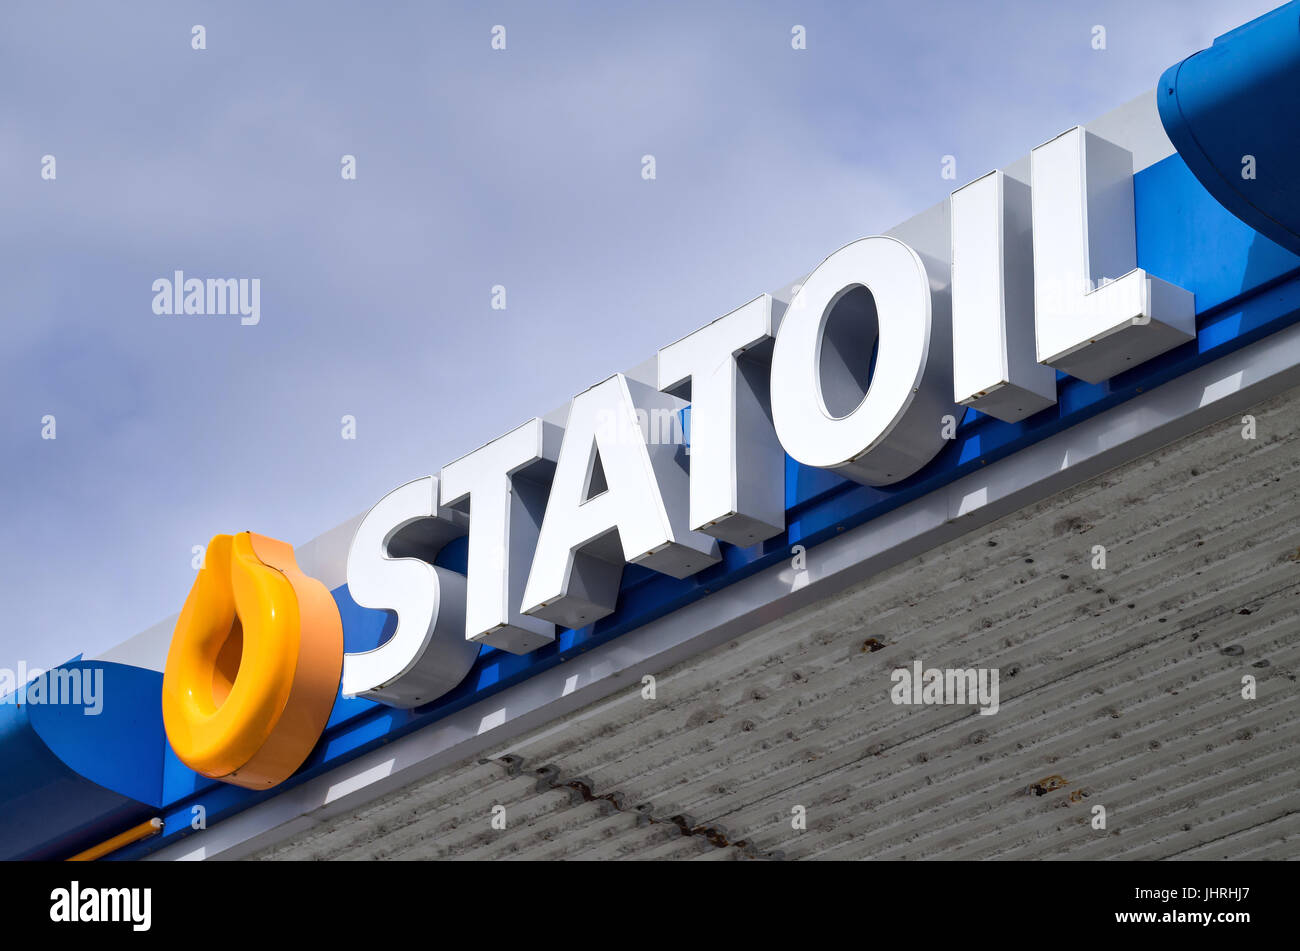 Statoil Gas Station Statoil Is A Norwegian Multinational Oil And